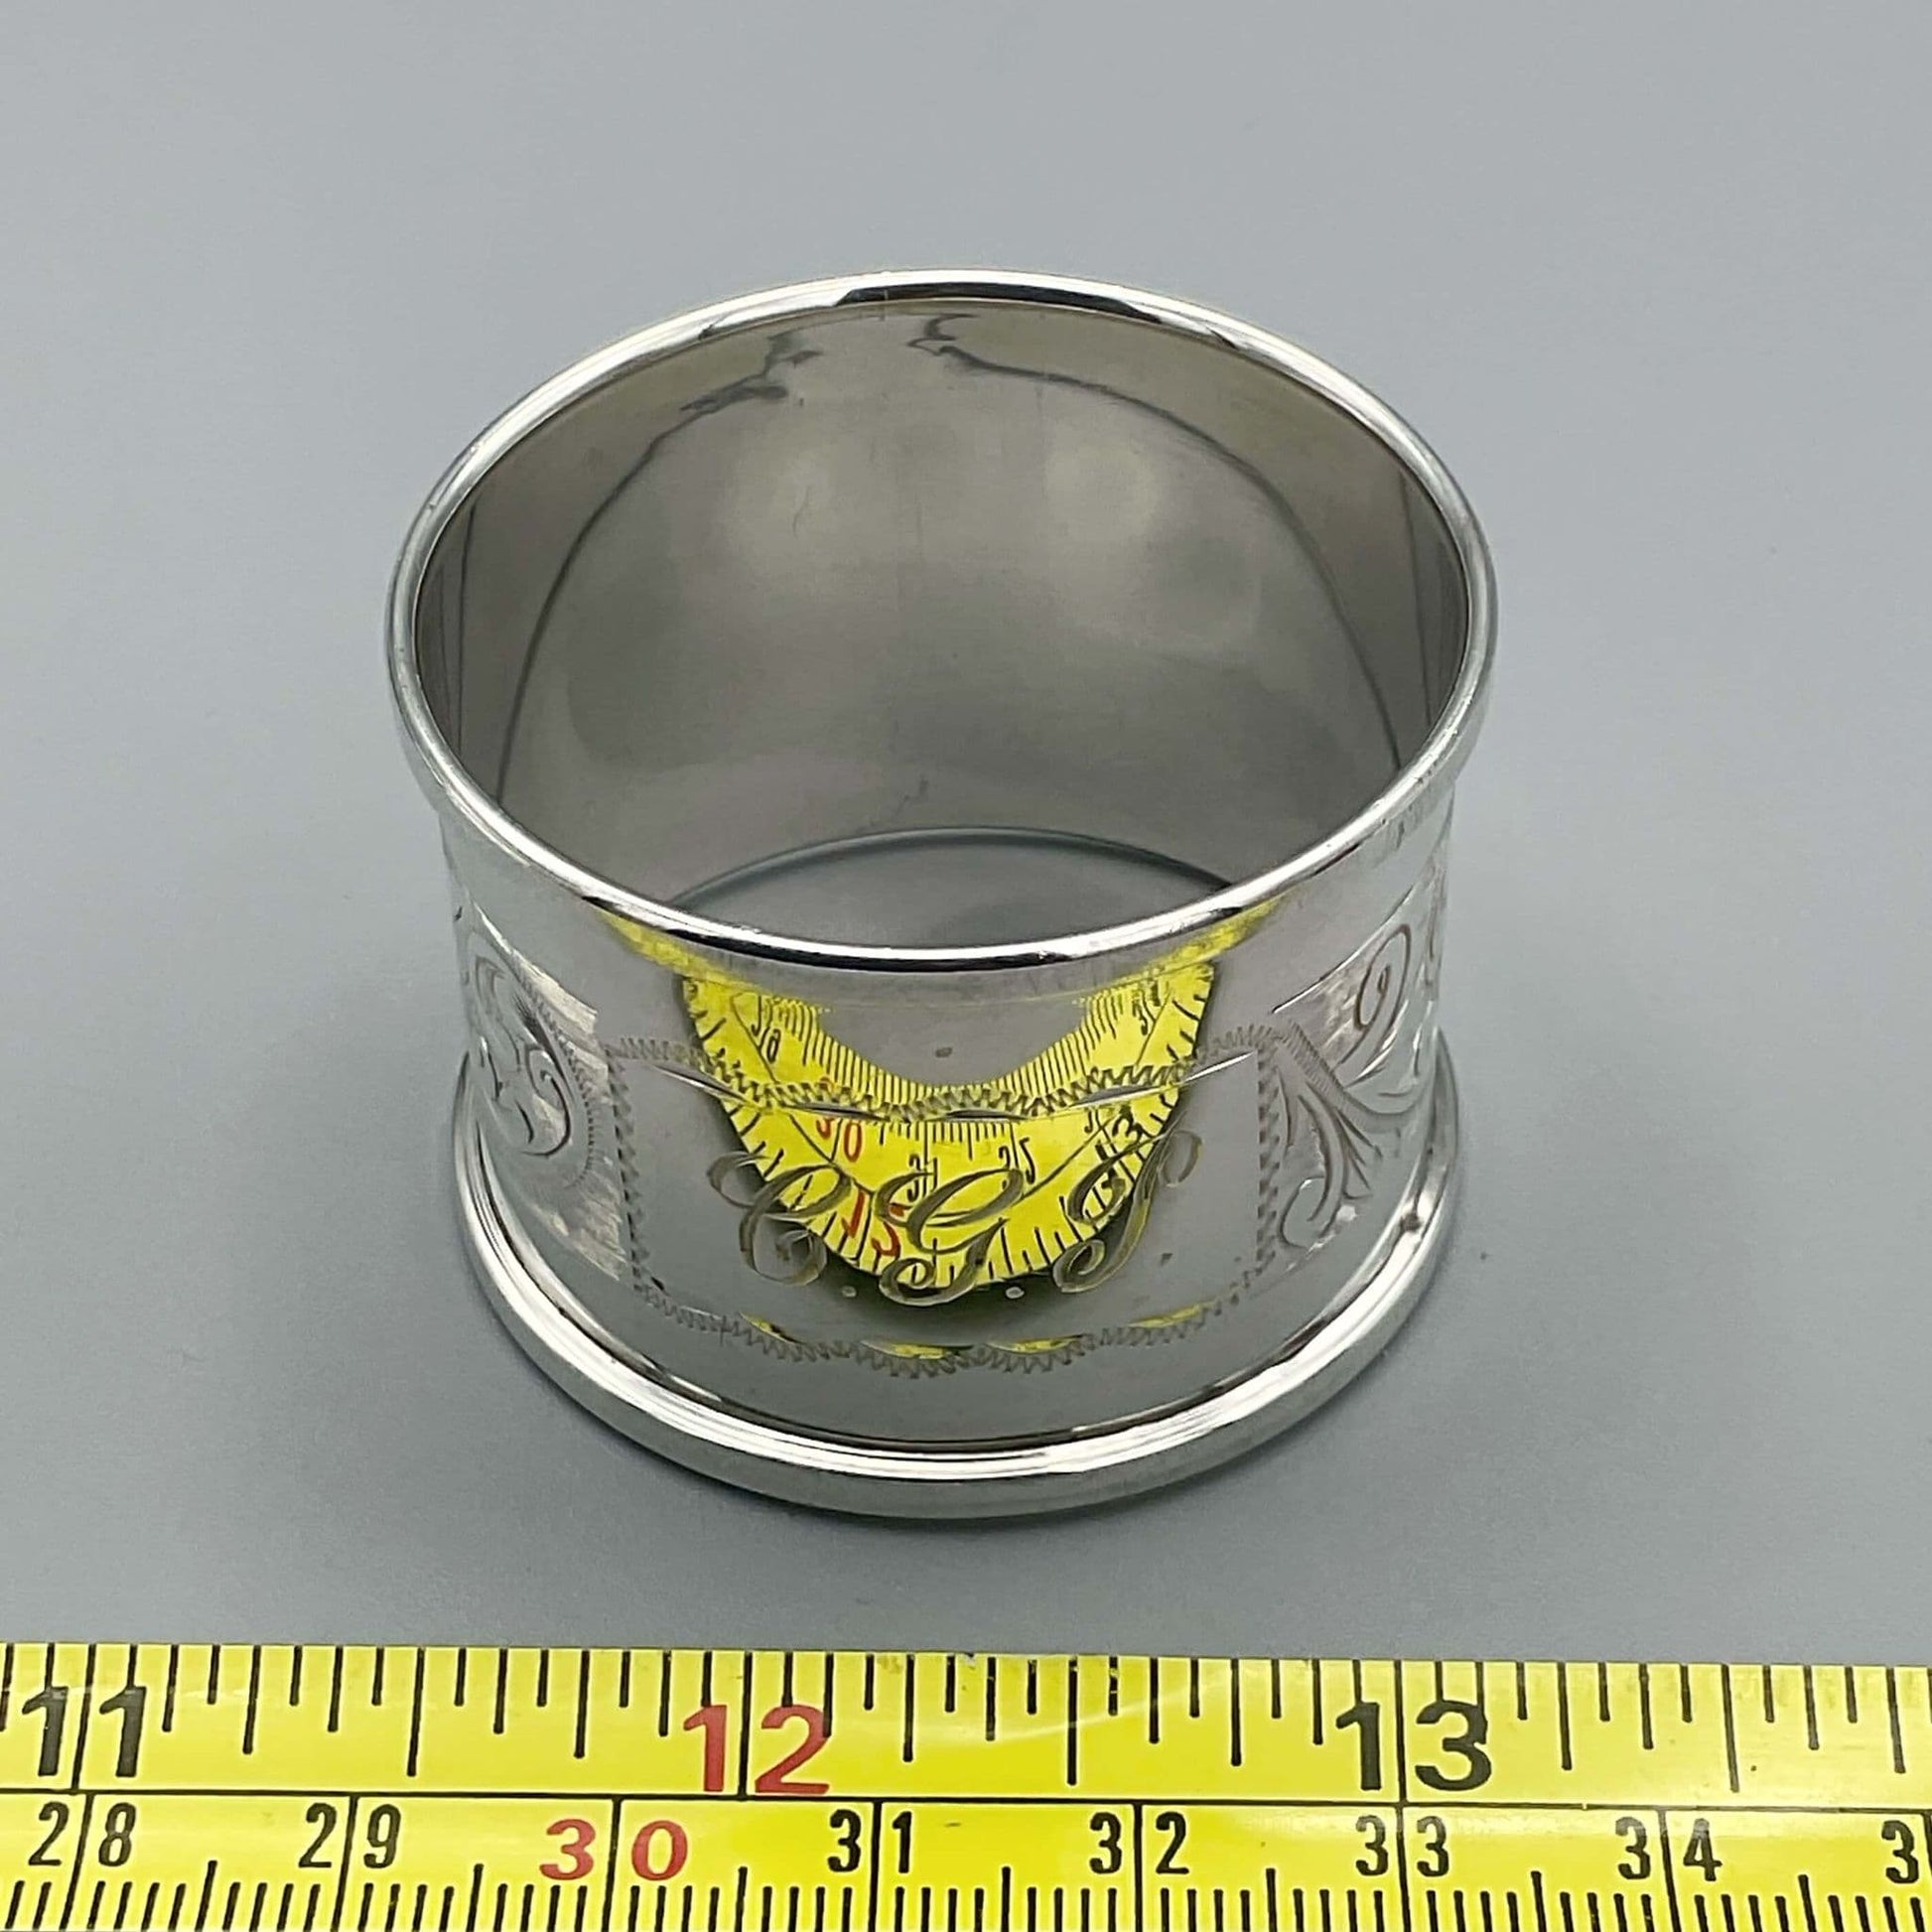 Silver Napkin ring with CGP engraved on the front of it next to a tape measure showing it's size as about 4cm.